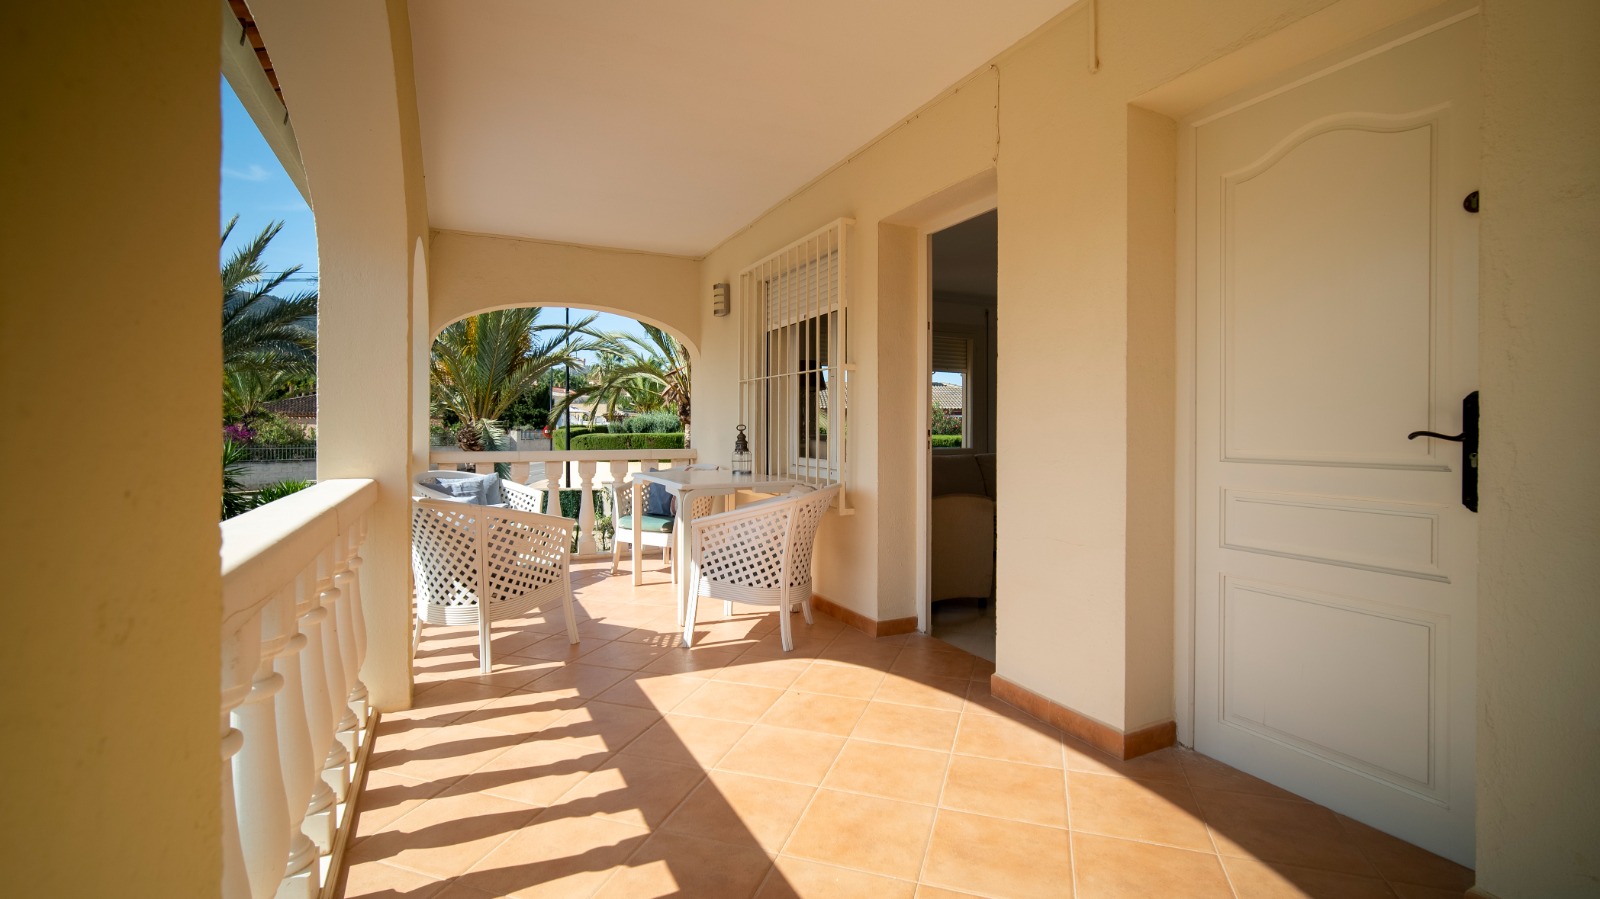 Fantastic villa with 2 guest apartments close to the center